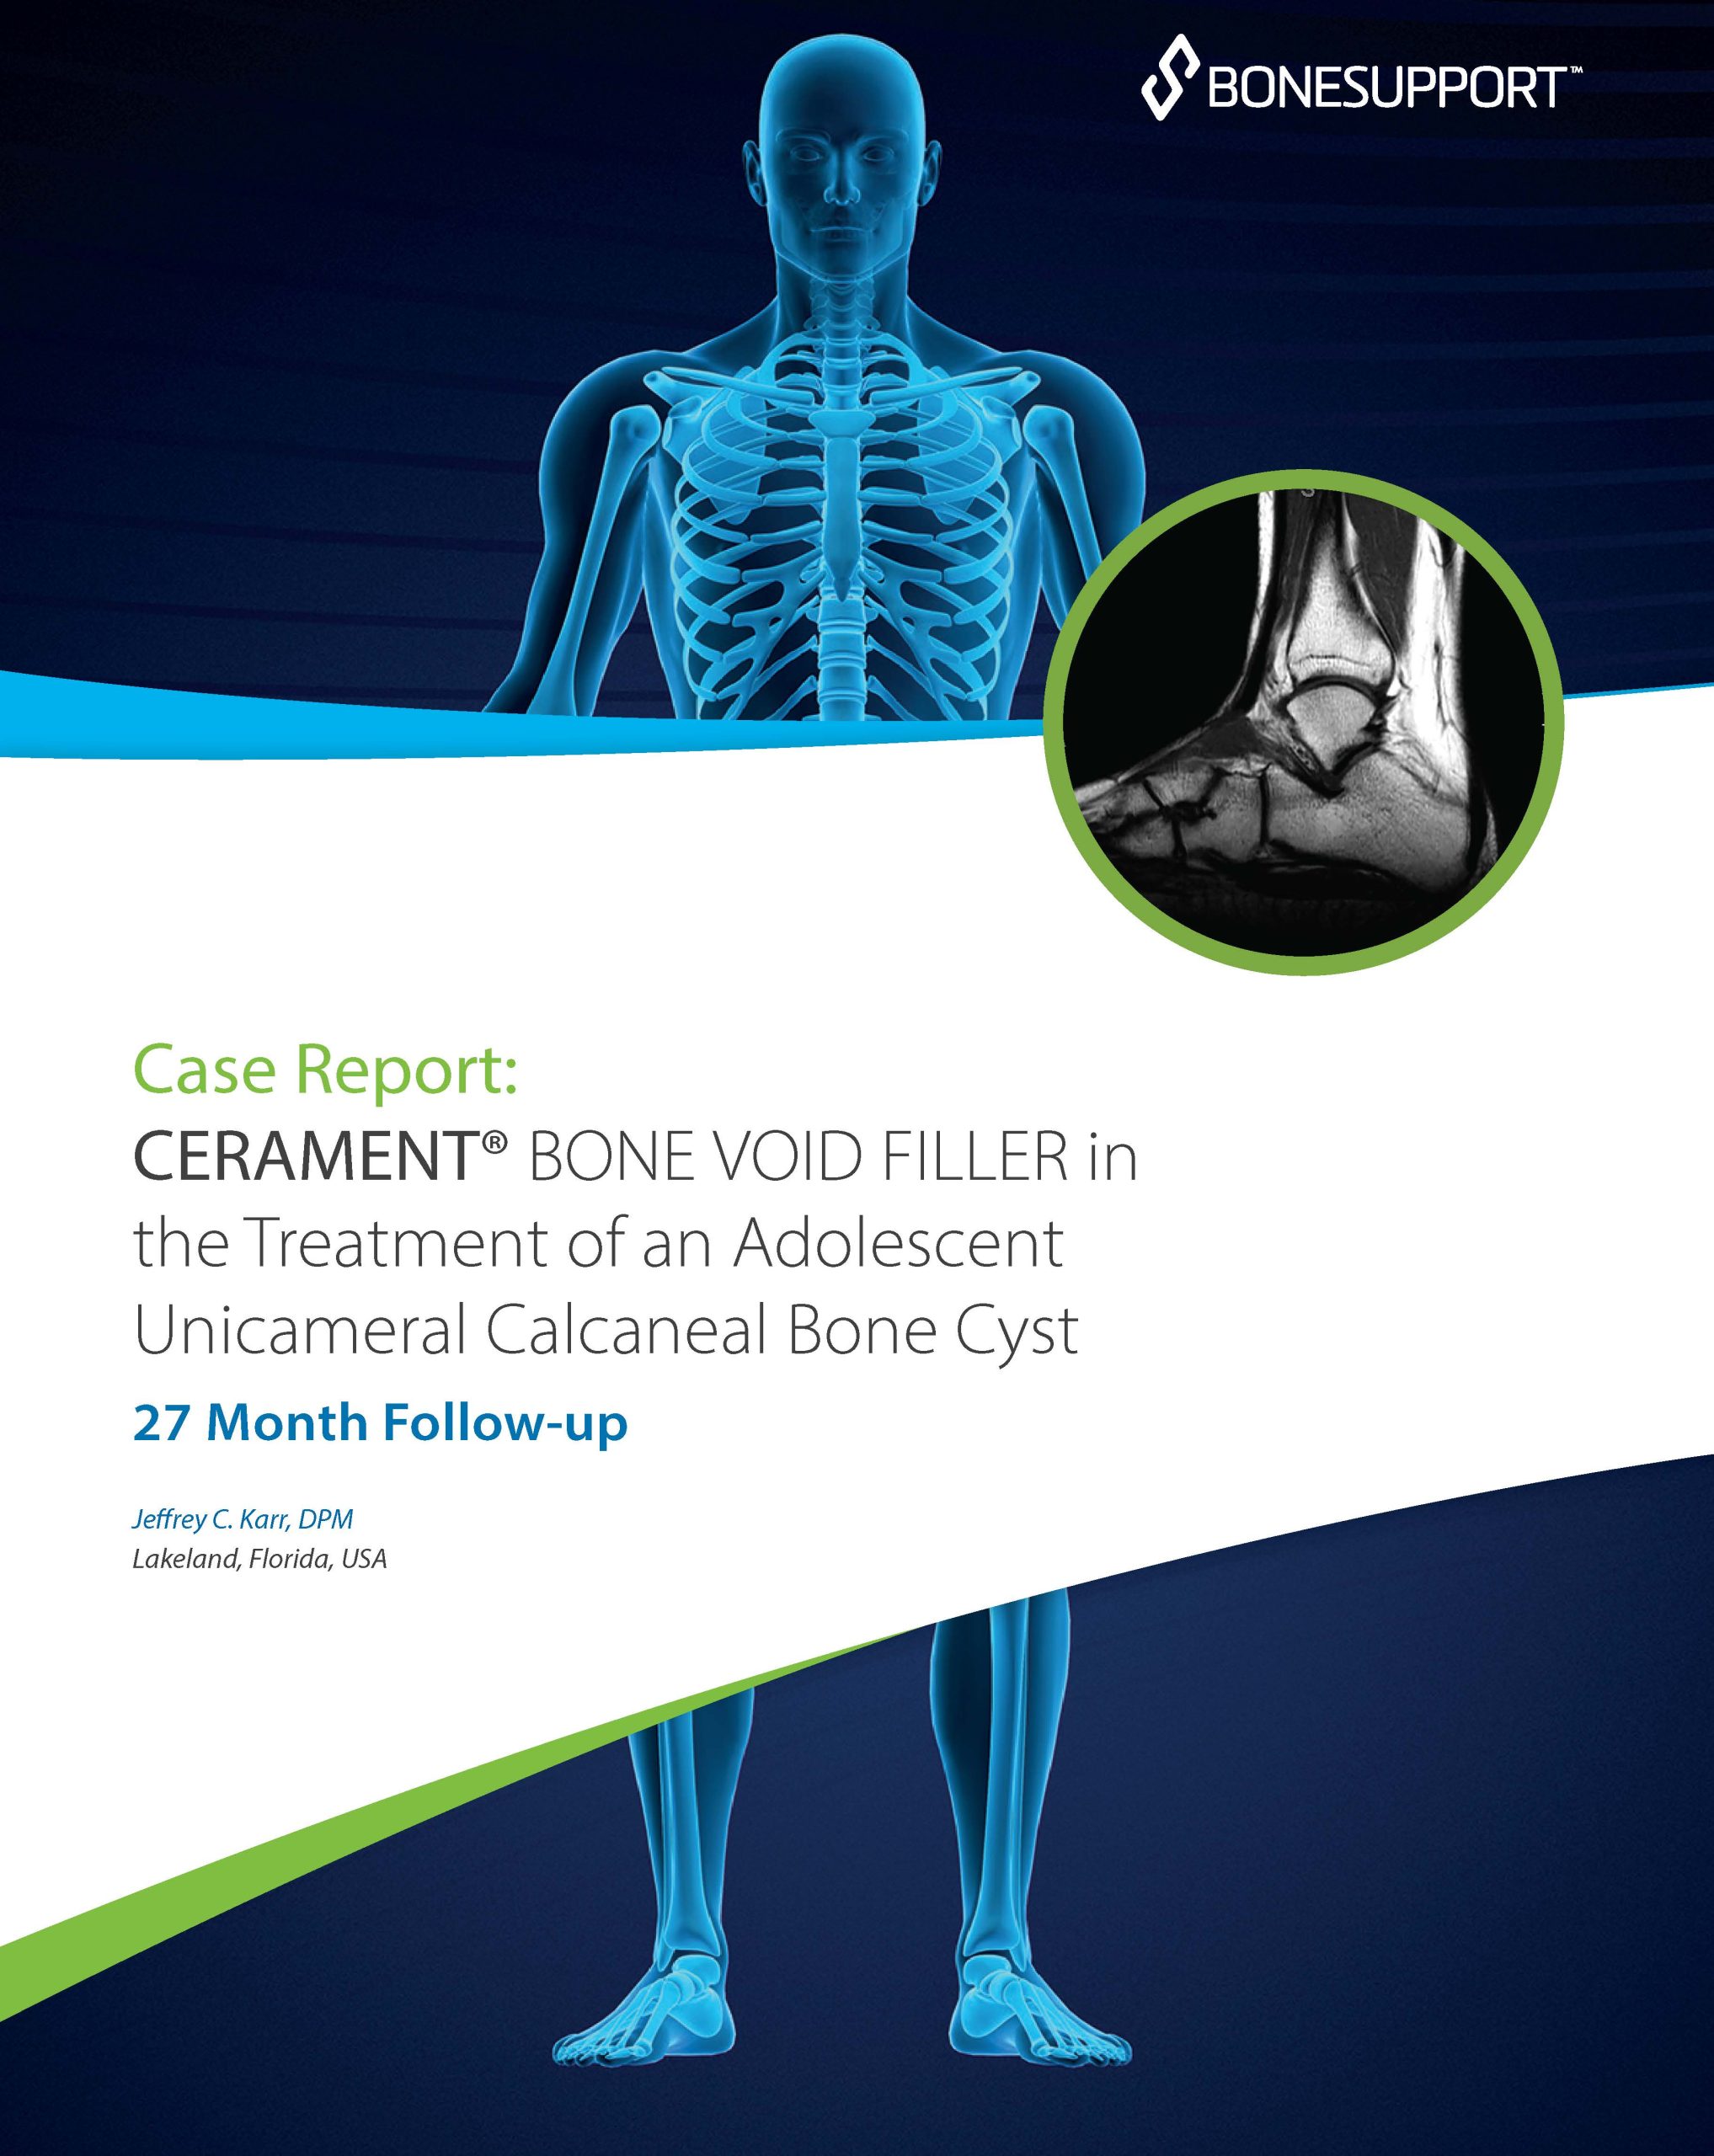 CERAMENT BONE VOID FILLER in the Treatment of an Adolescent Unicameral Calcaneal Bone Cyst 27 Month Follow-up